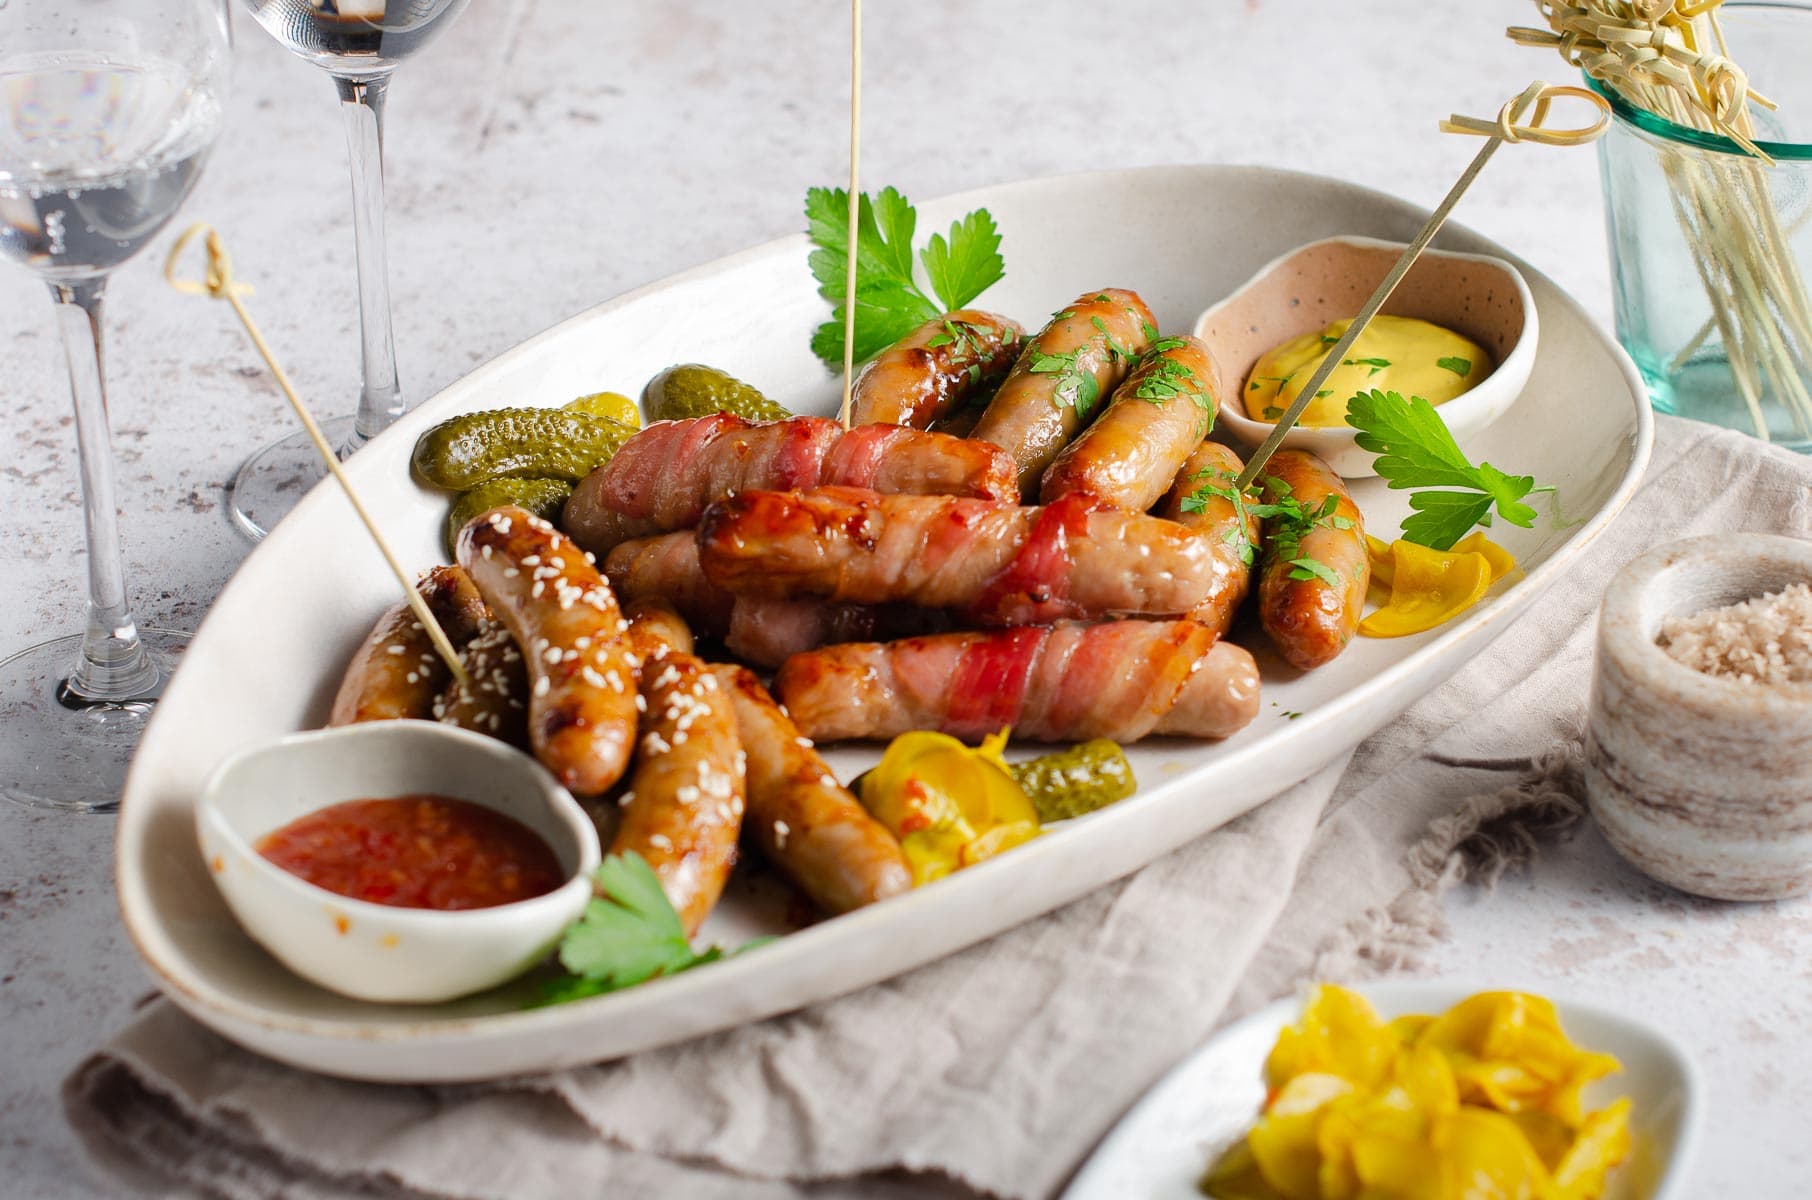 A serving platter of cocktail sausages with 3 types of flavours, dipping sauces, some pickles and cocktail sticks and sparkling wine.